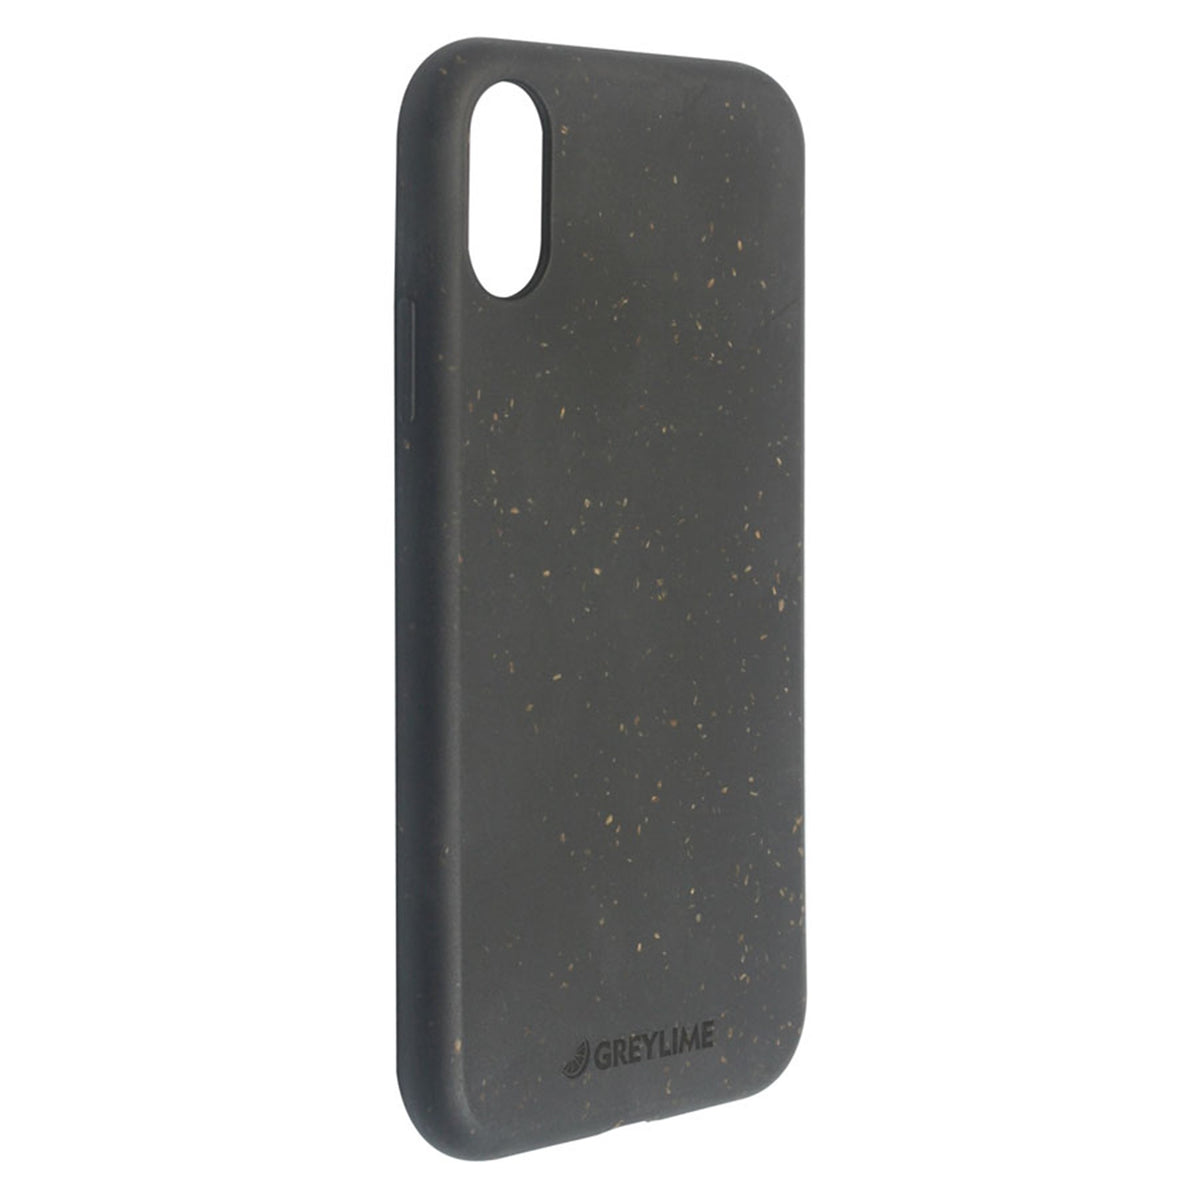 COIPXR06 Greylime Iphone XR Biodegradable Cover Black 3